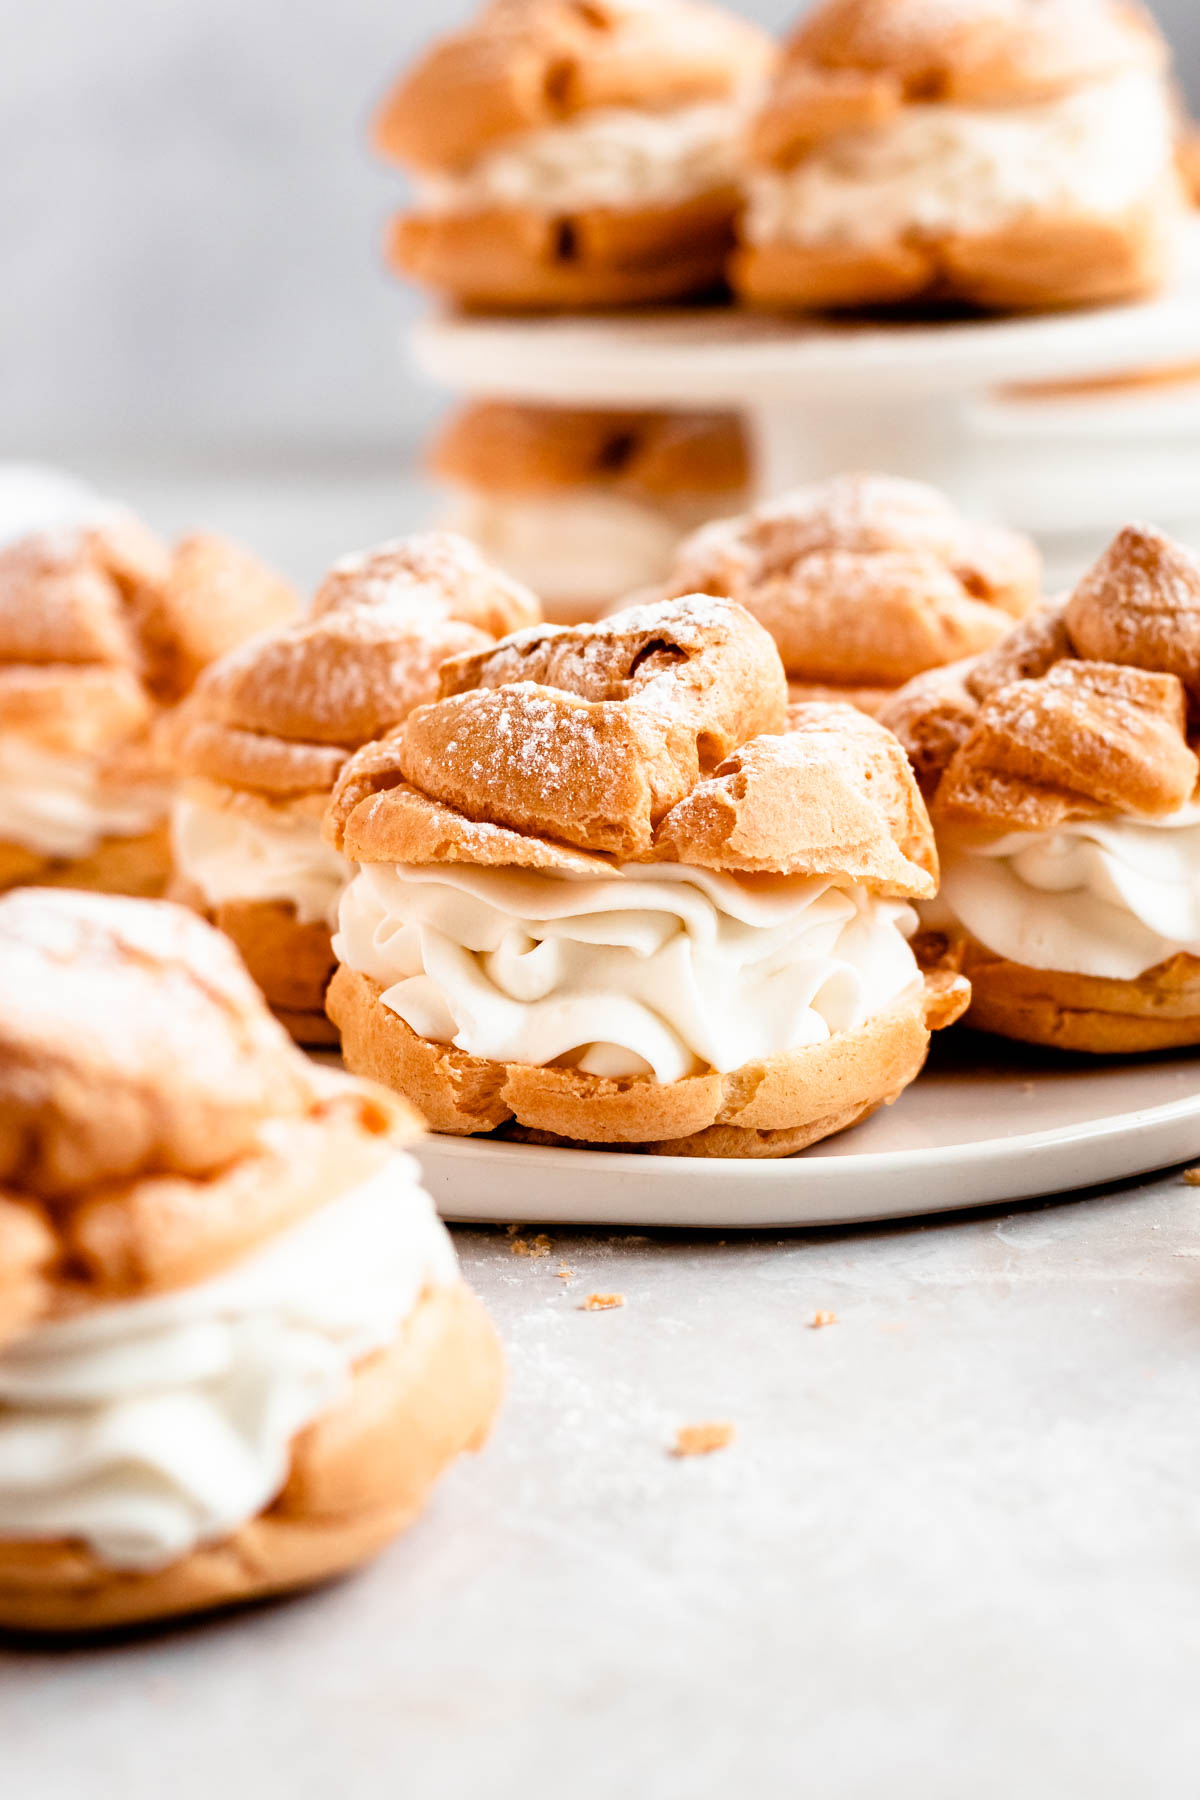 Cream puffs with powder sugar on top on a white plate.